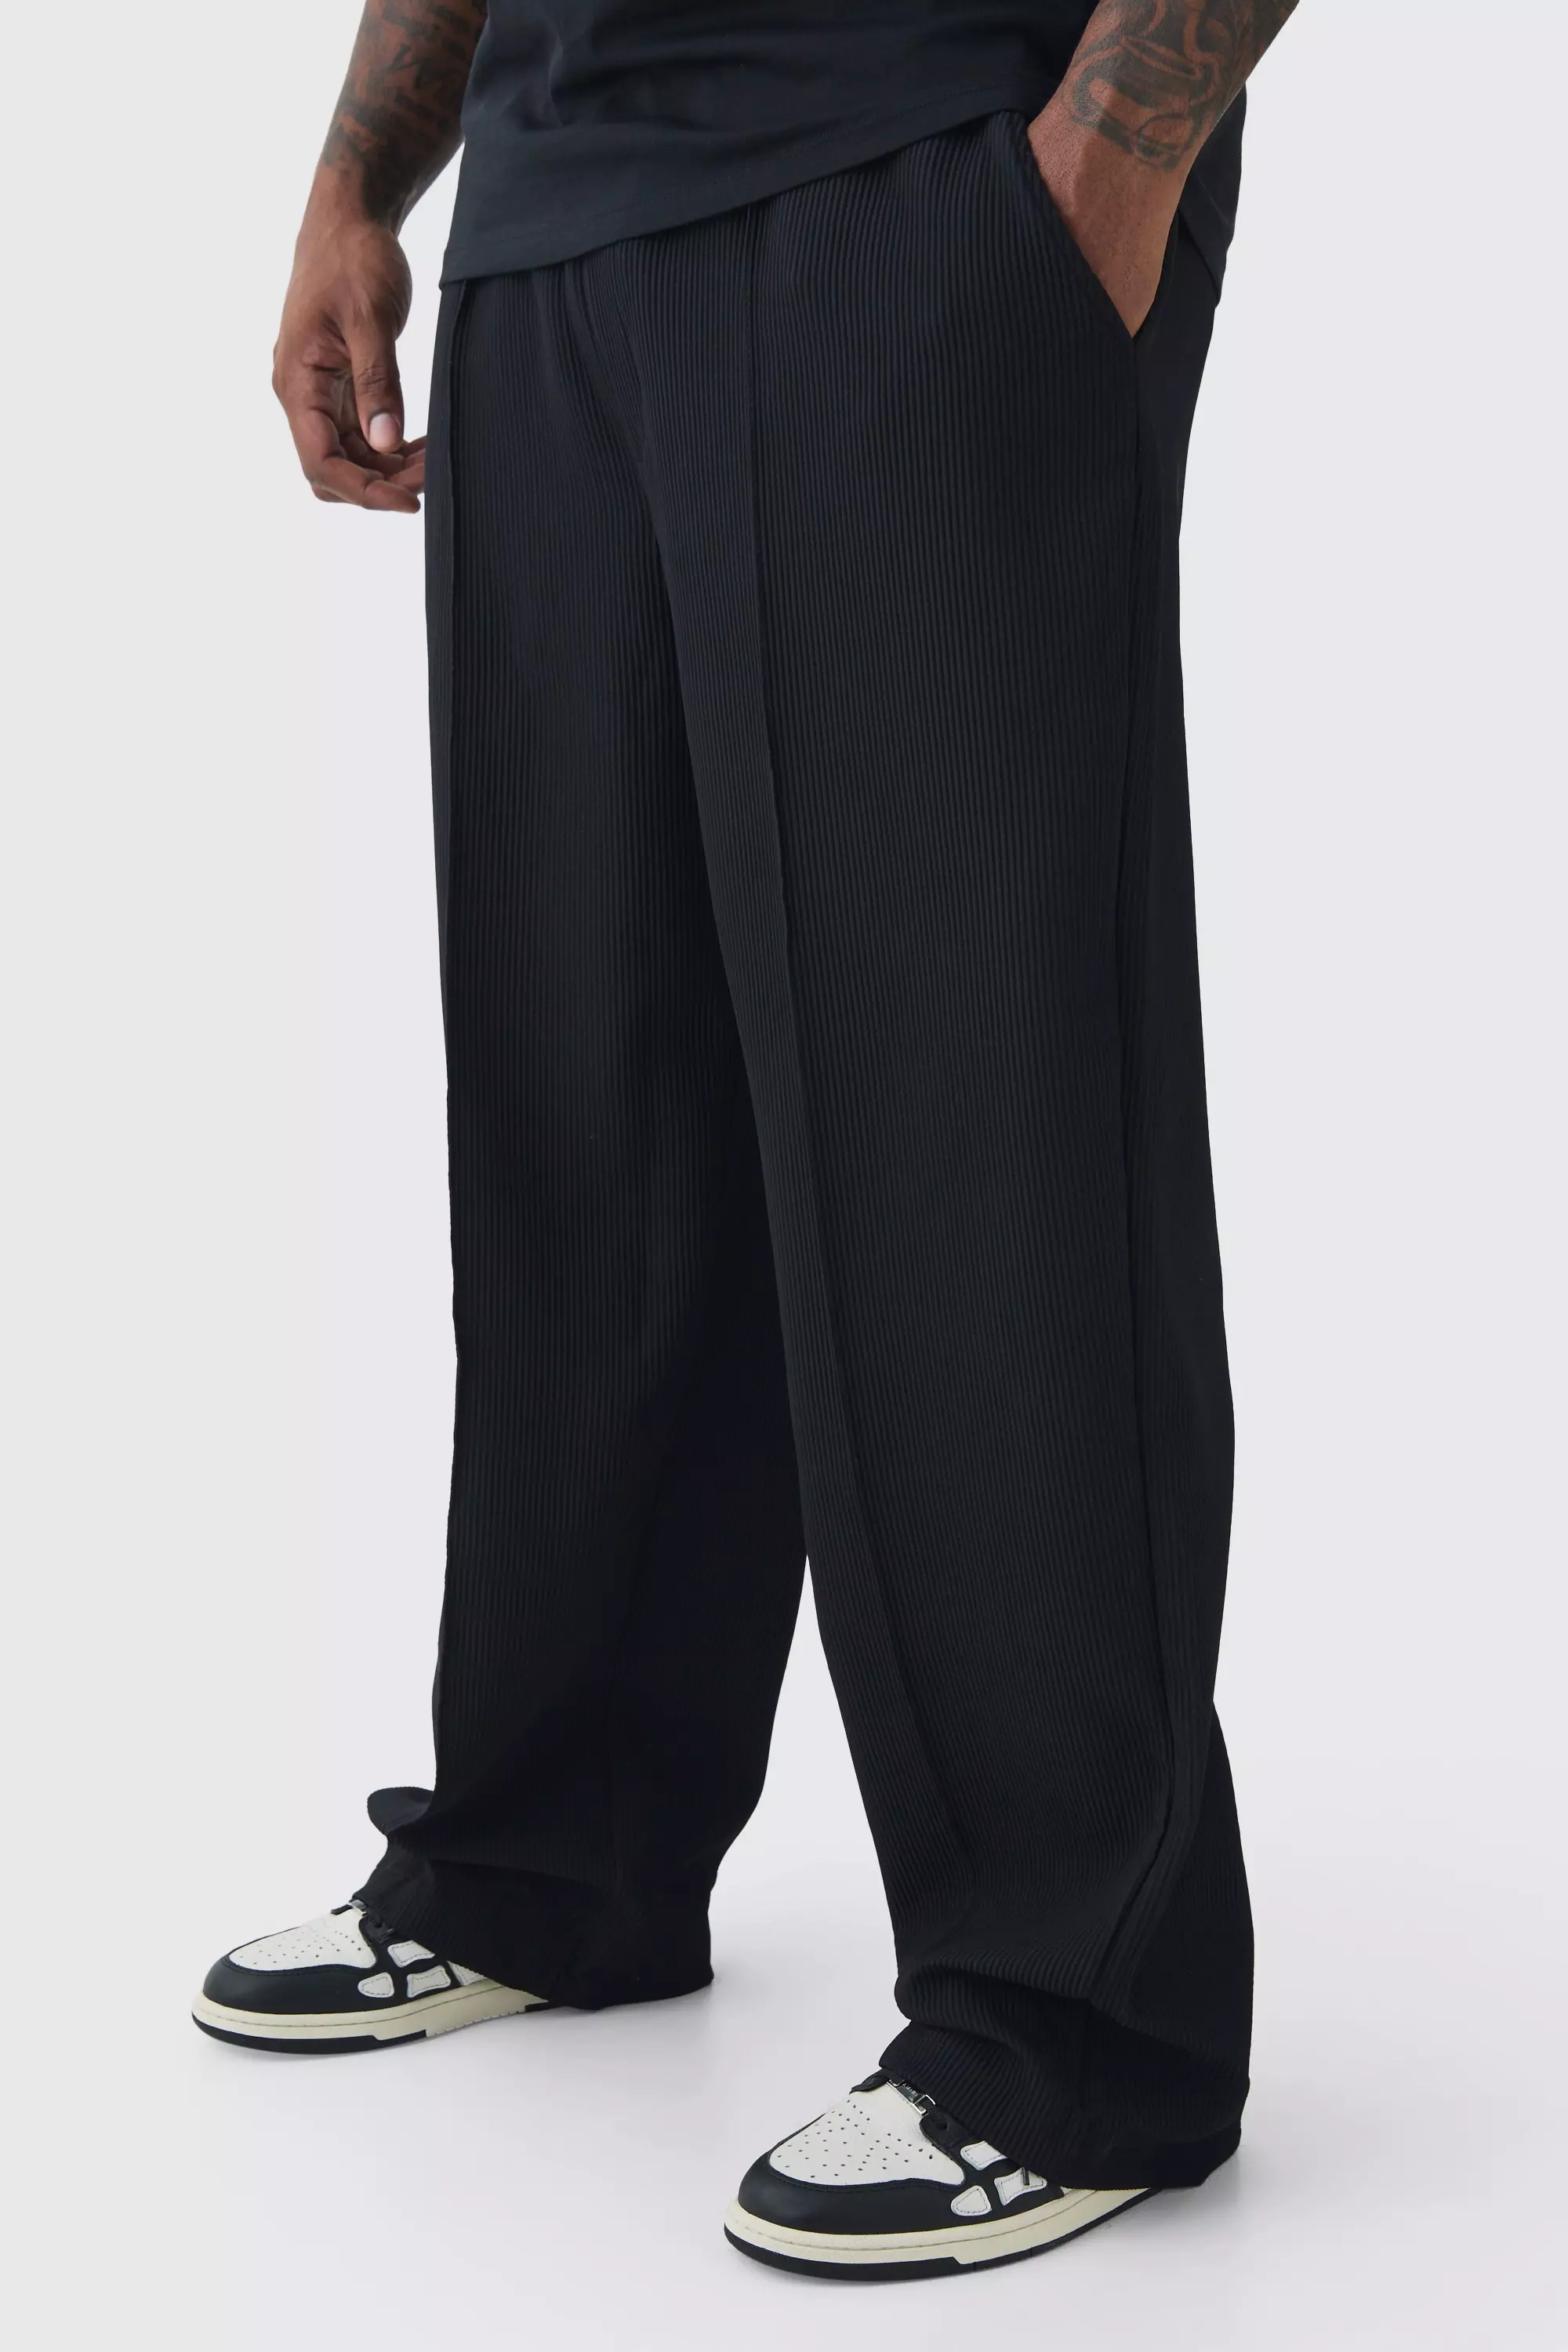 Plus Elastic Waist Relaxed Fit Pleated Pants Black